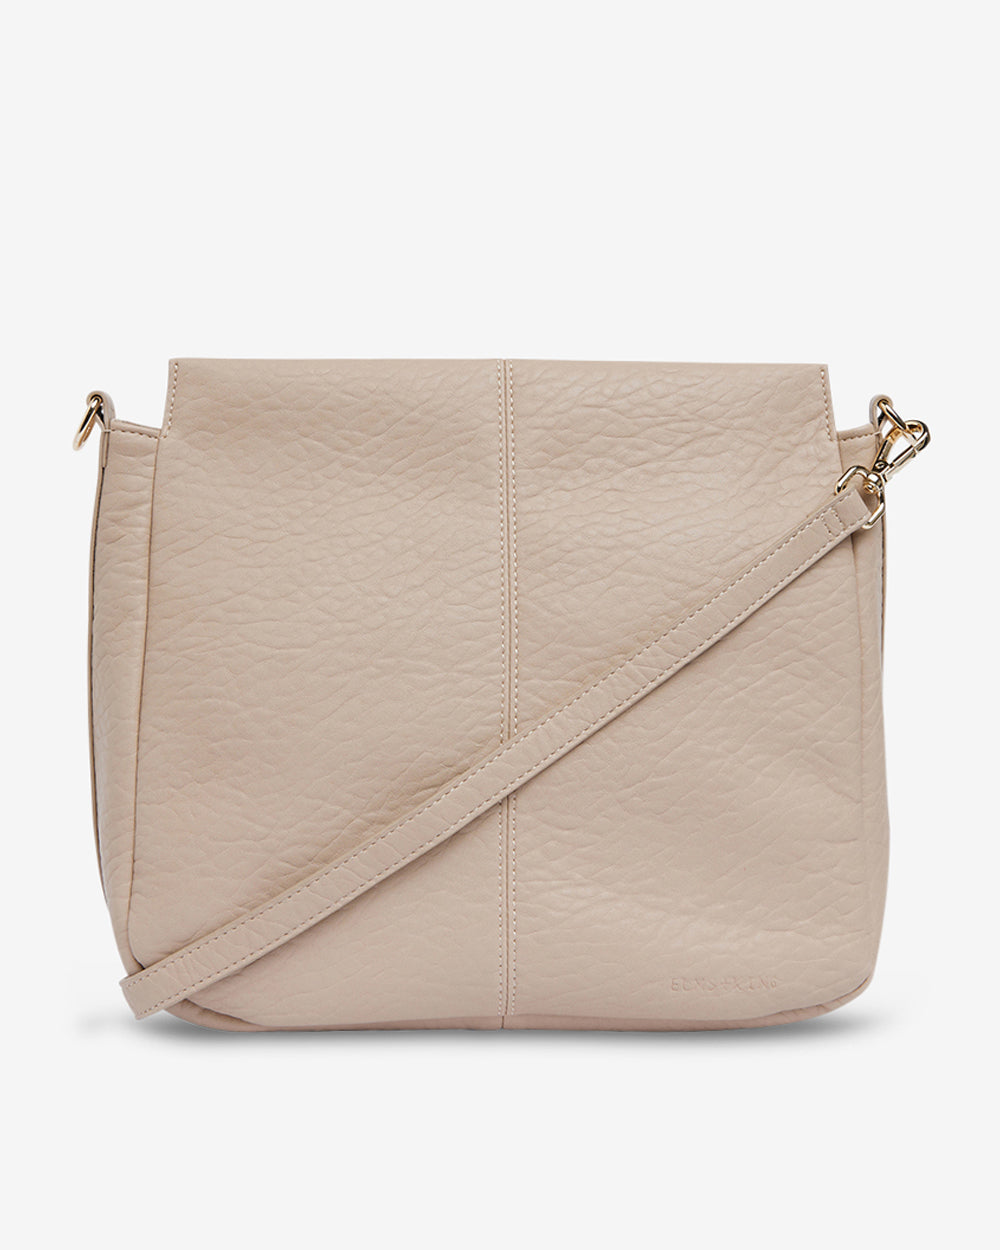 Bellevue Tote - Oyster